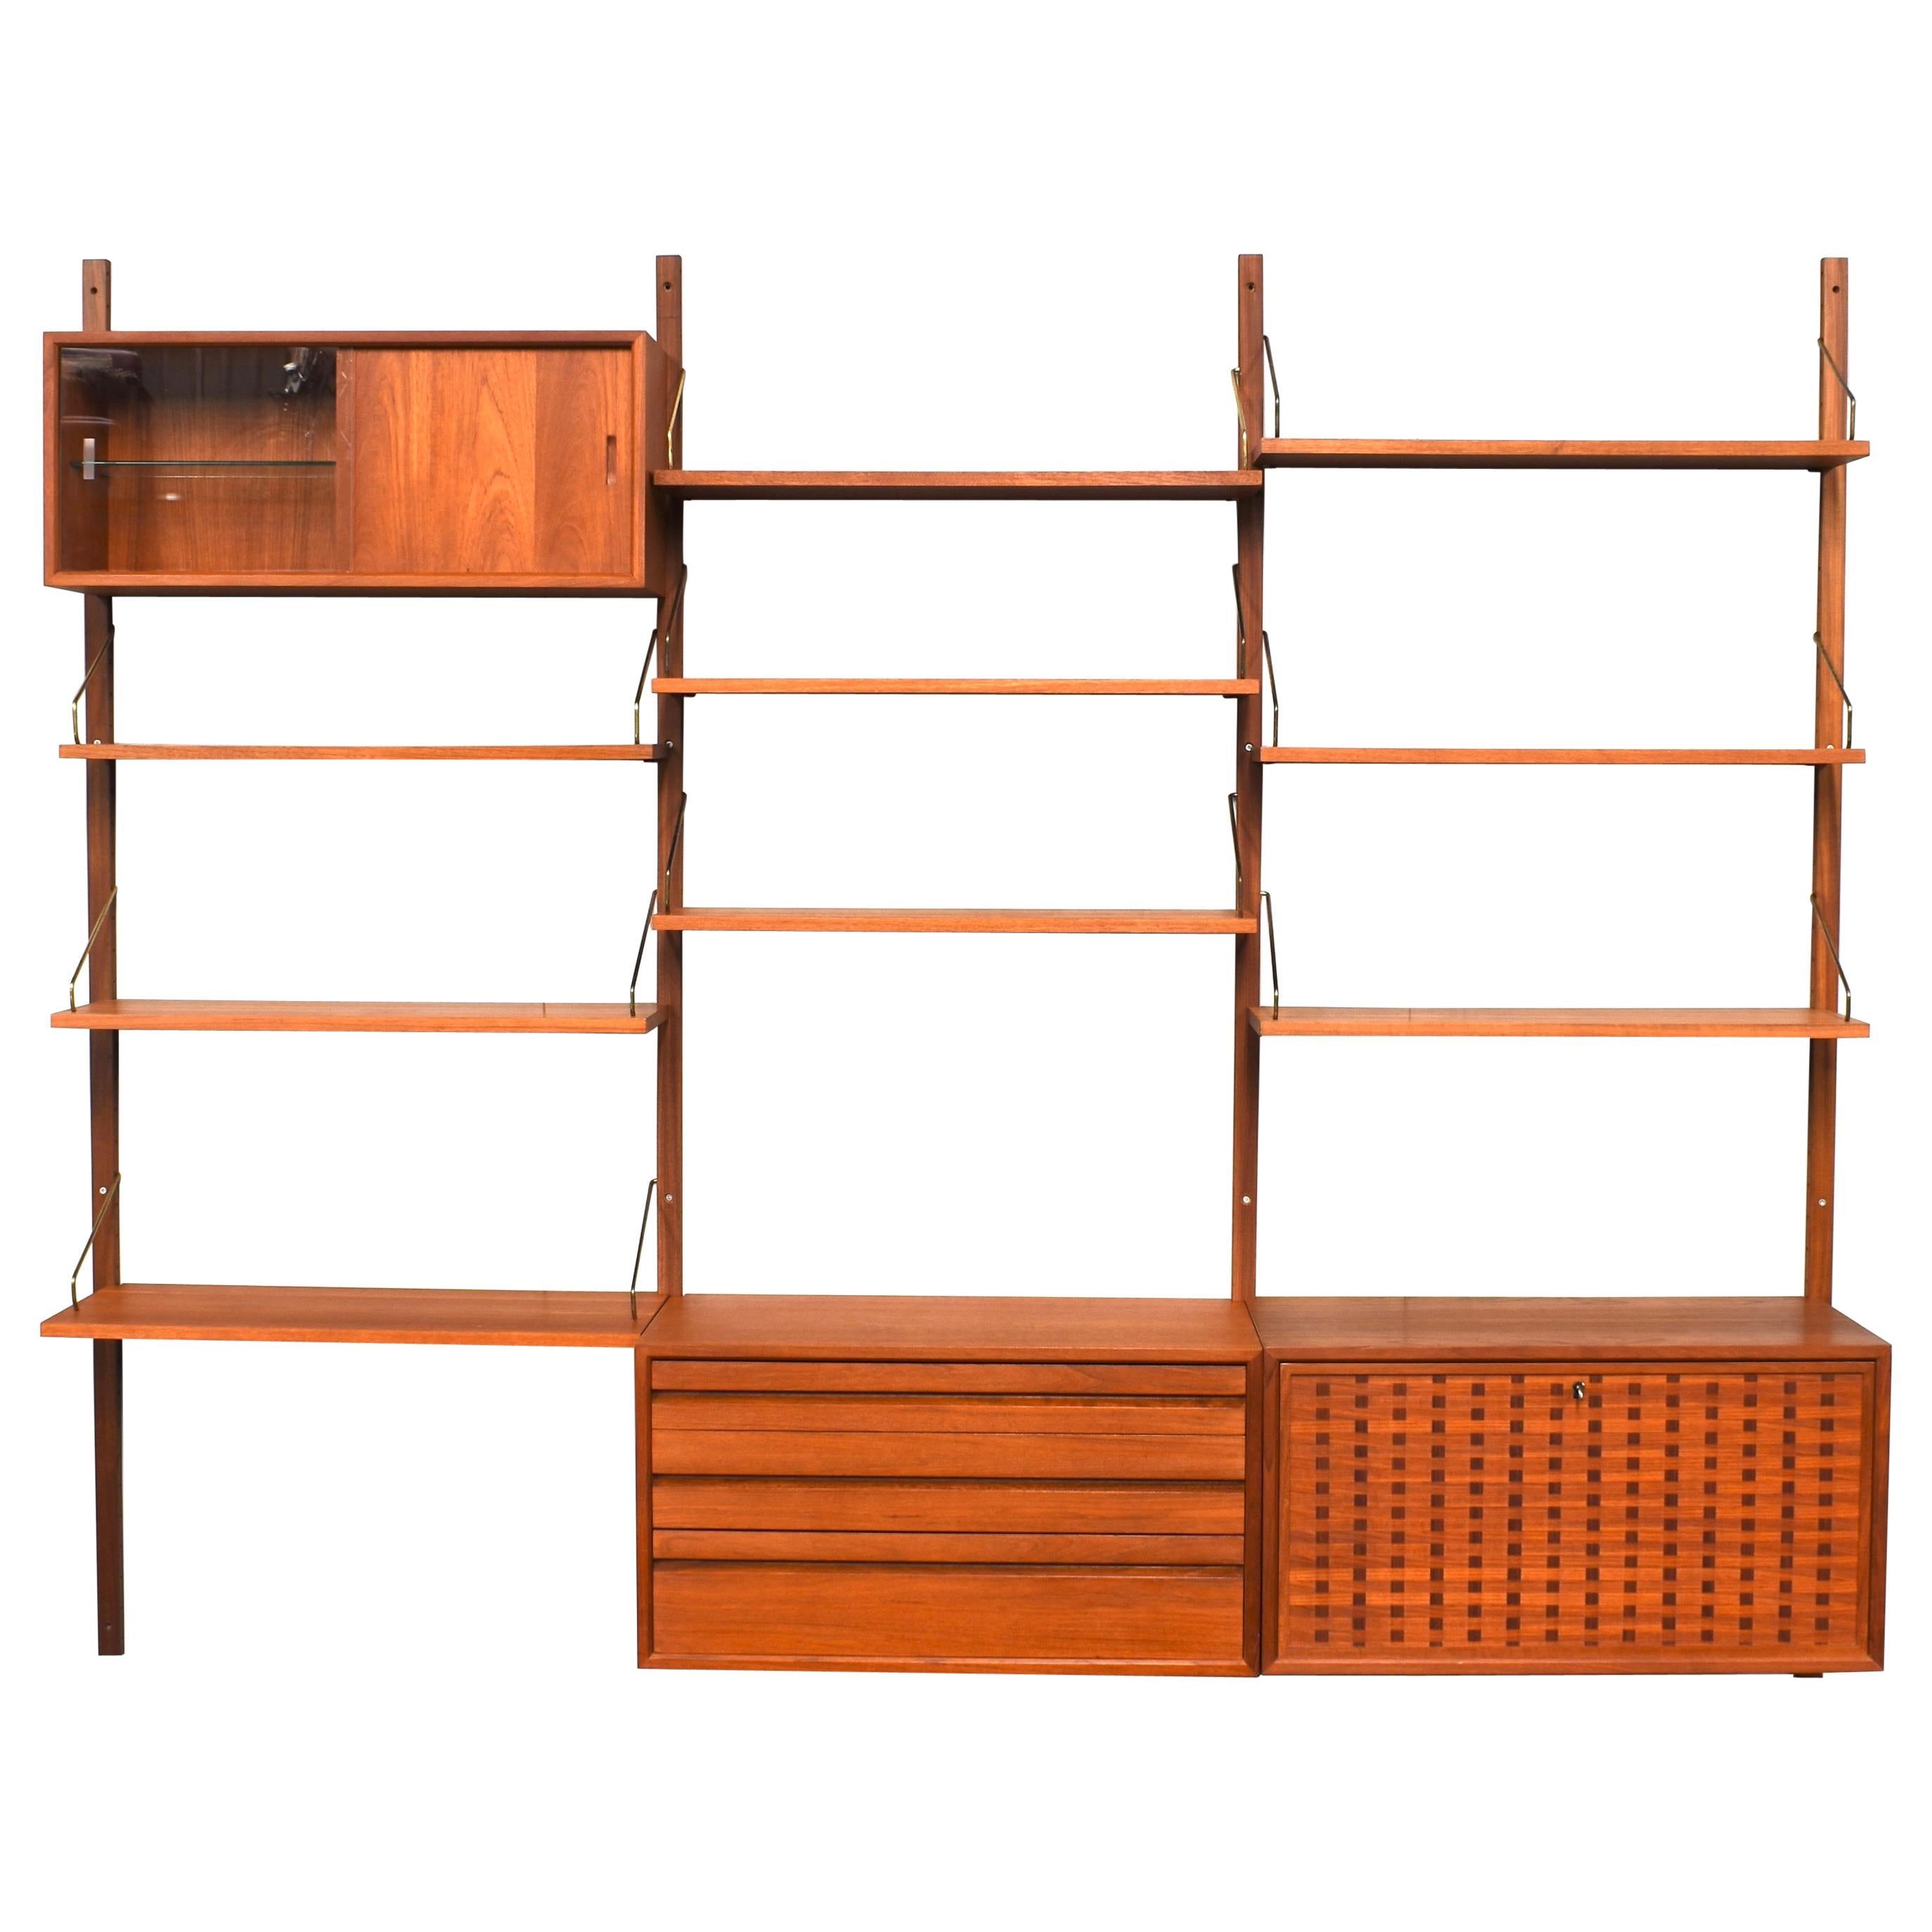 Exclusive Brass and Teak Royal Series Wall Unit by Poul Cadovius, Denmark, 1950